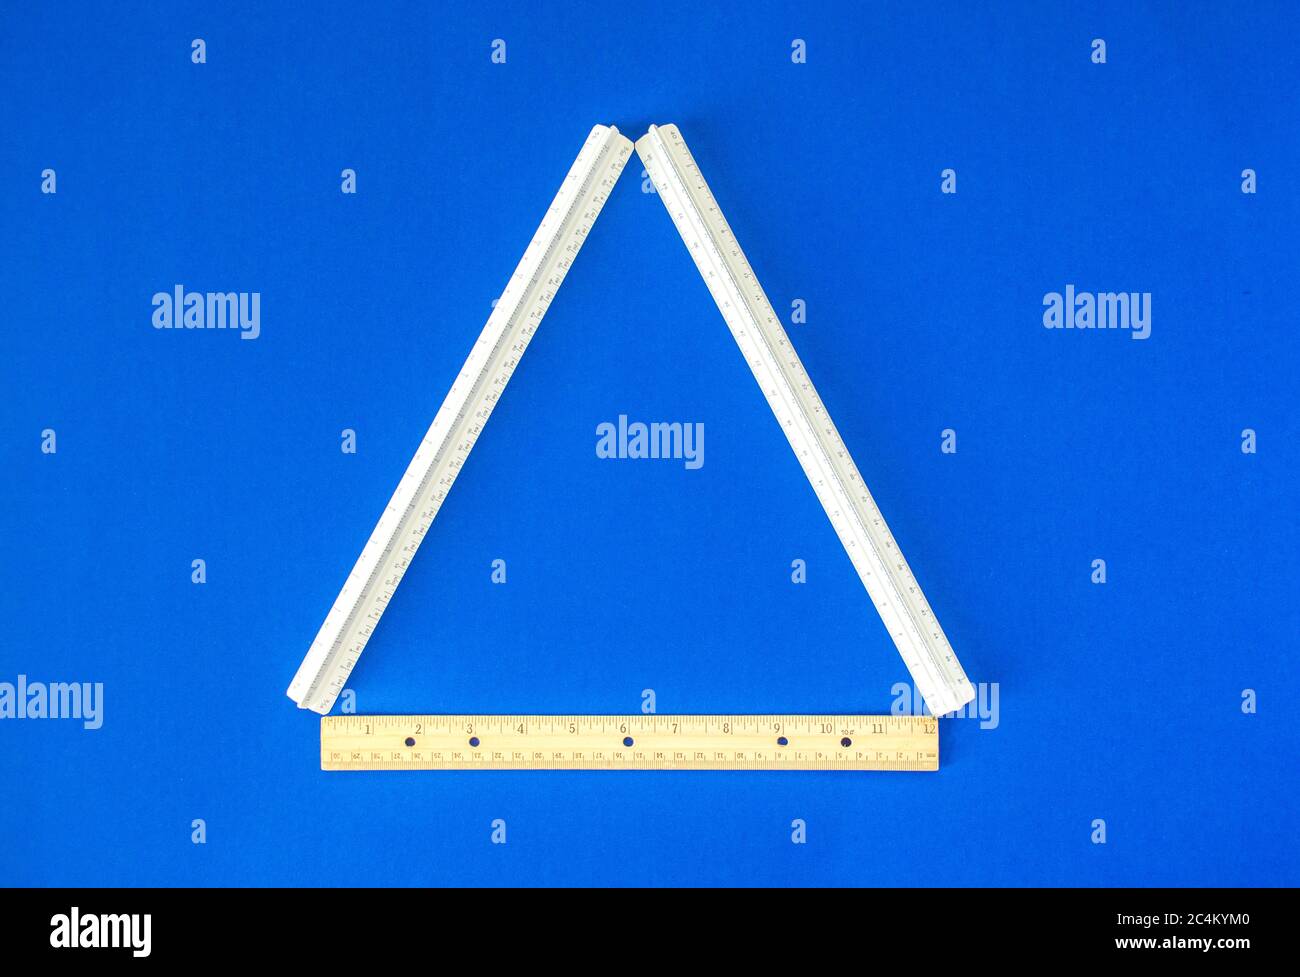 a triangle formed by three rulers on a bright blue background Stock Photo